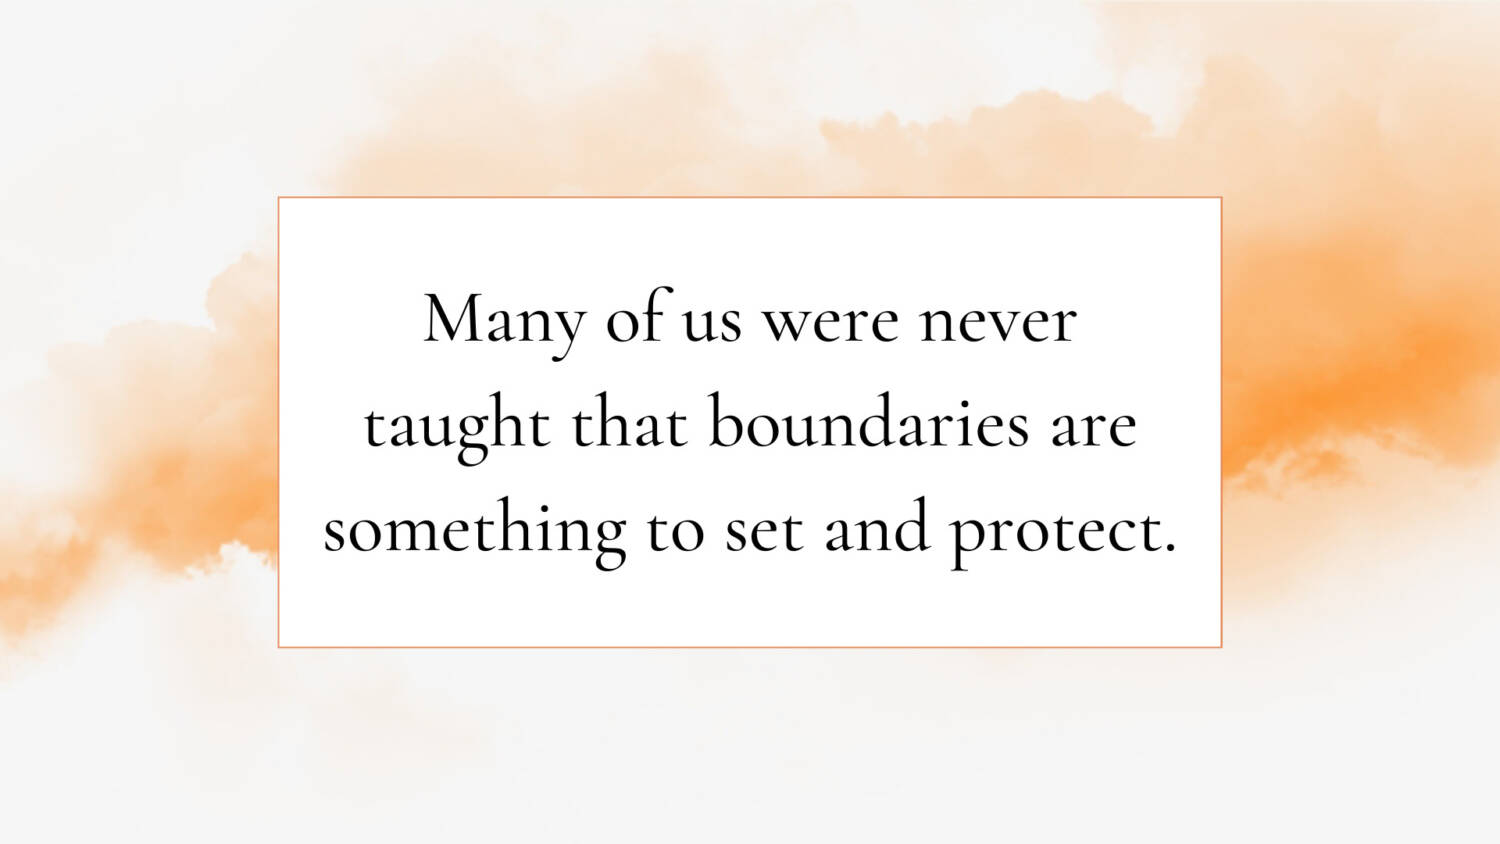 Boundaries are something to set and protect.